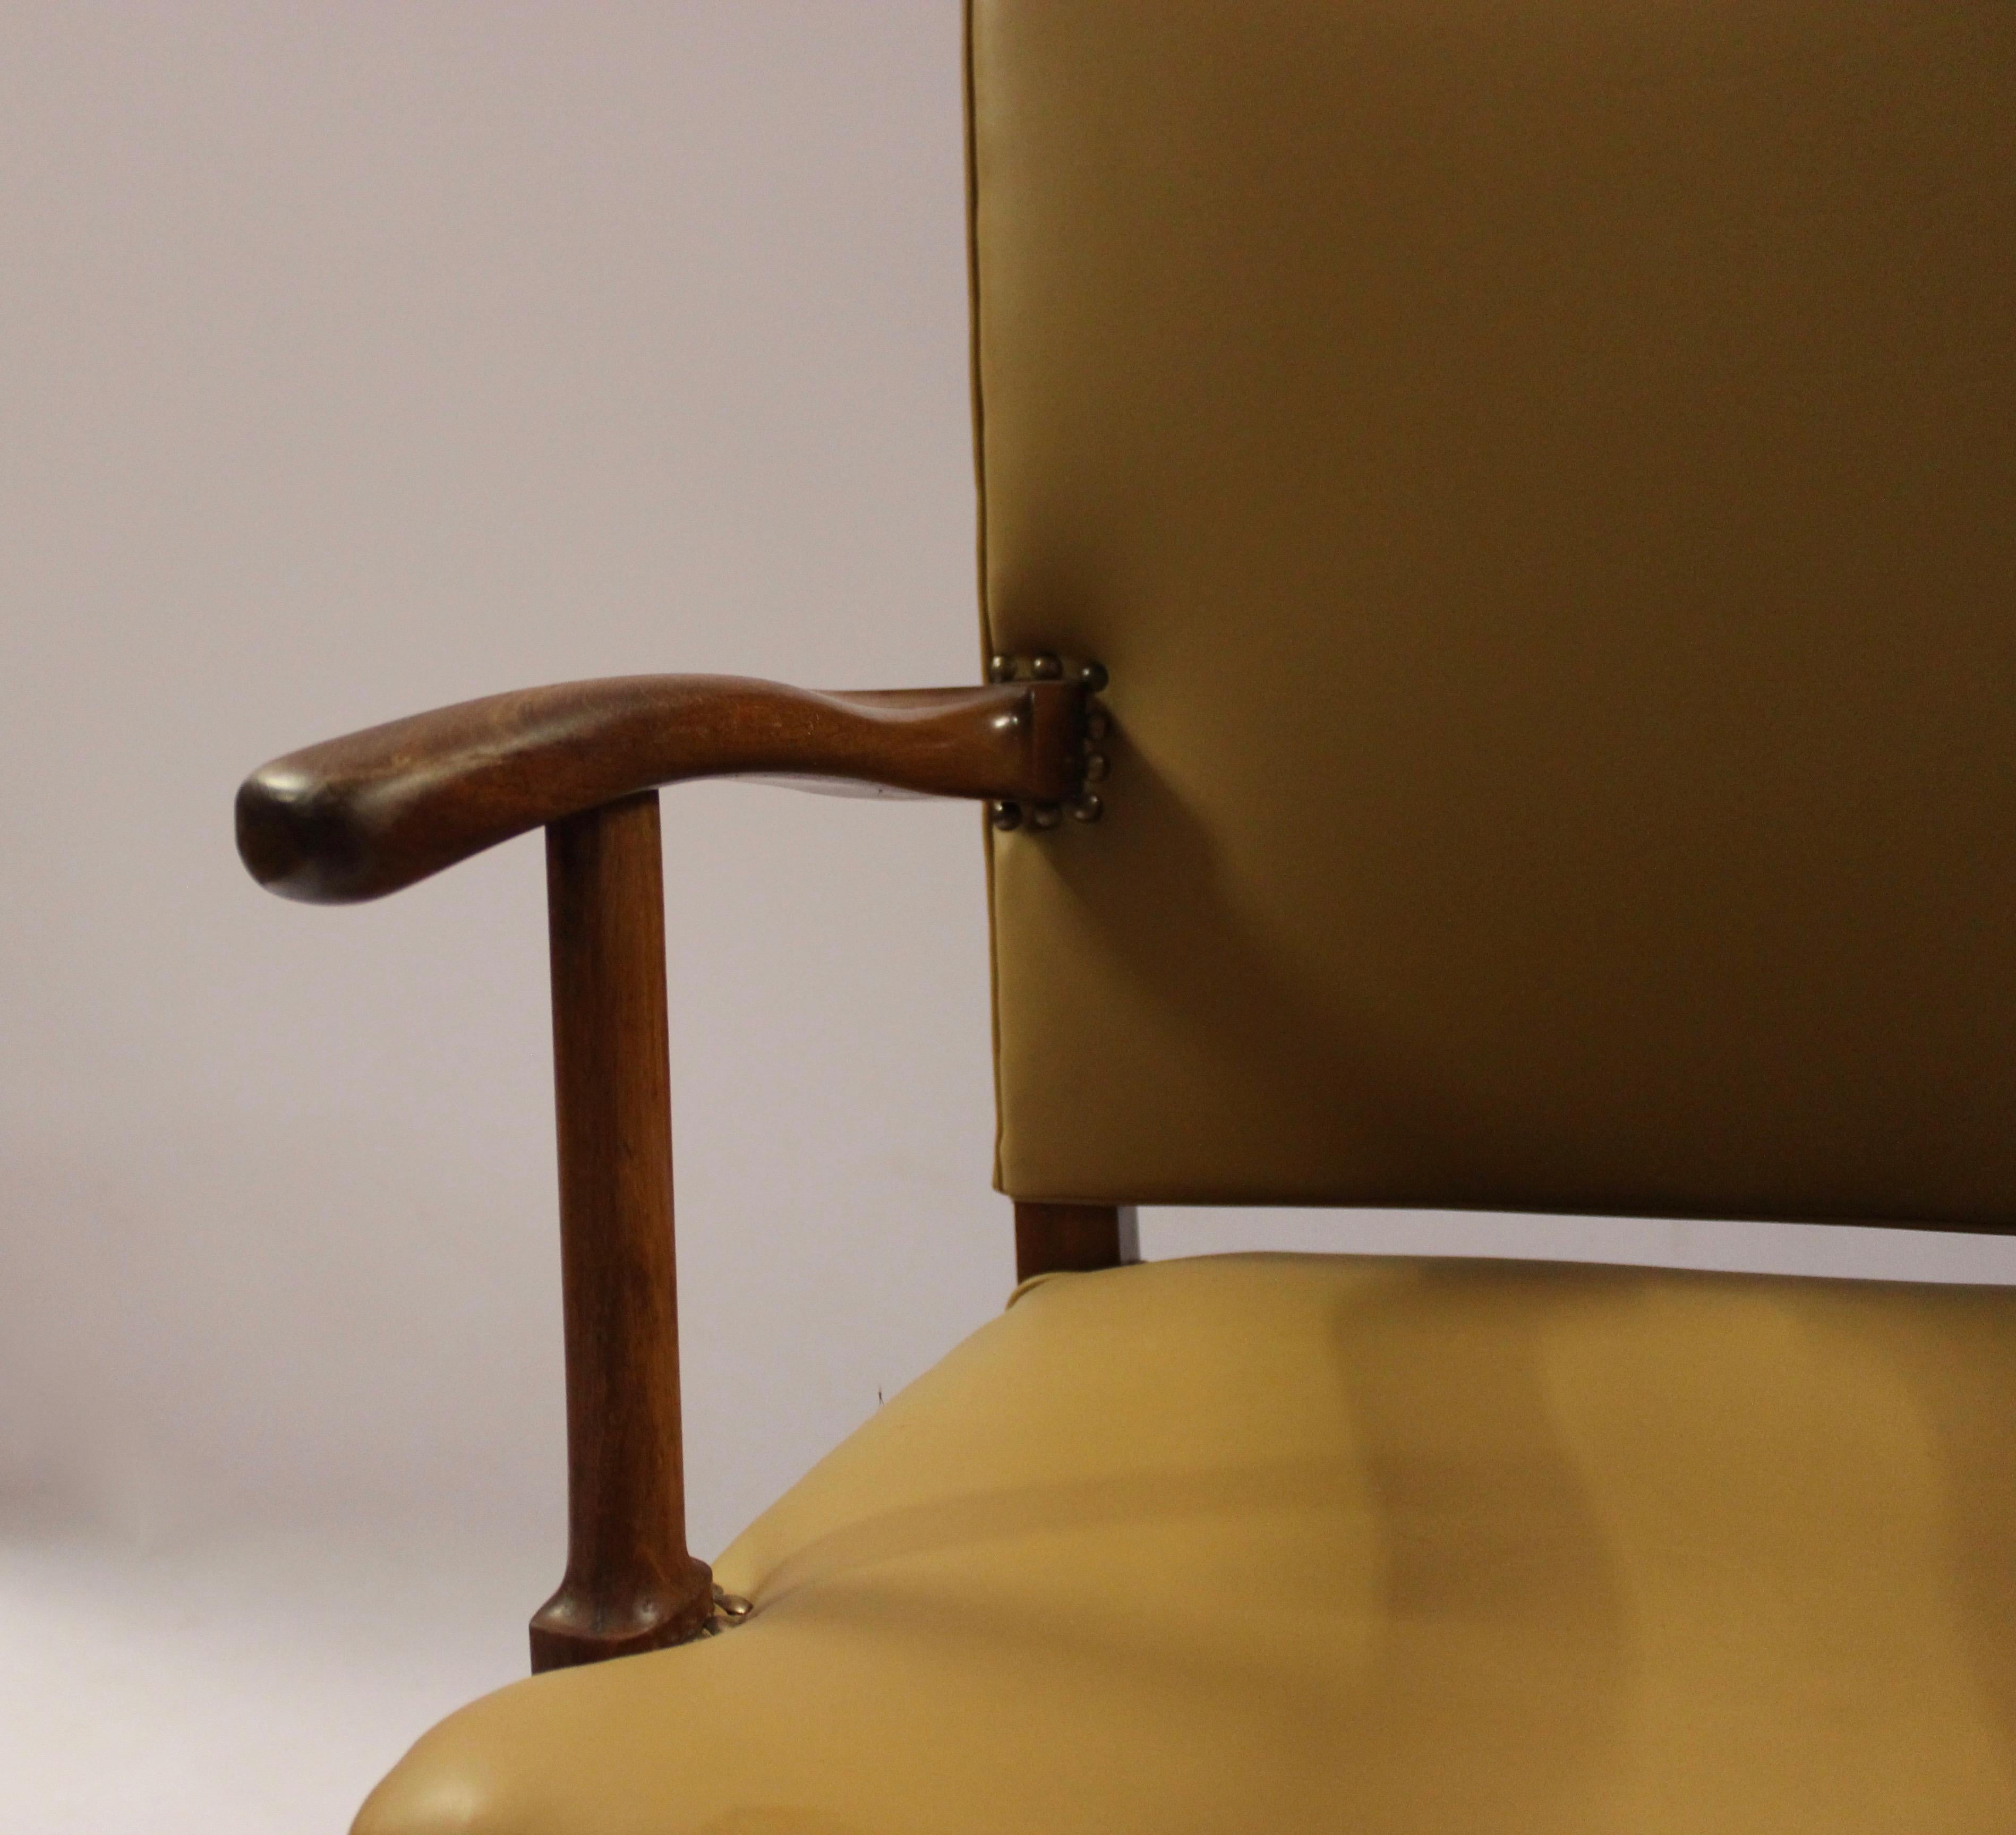 Mid-20th Century Armchair in Mahogany and Light Leather by Jacob Kjær from the 1950s For Sale